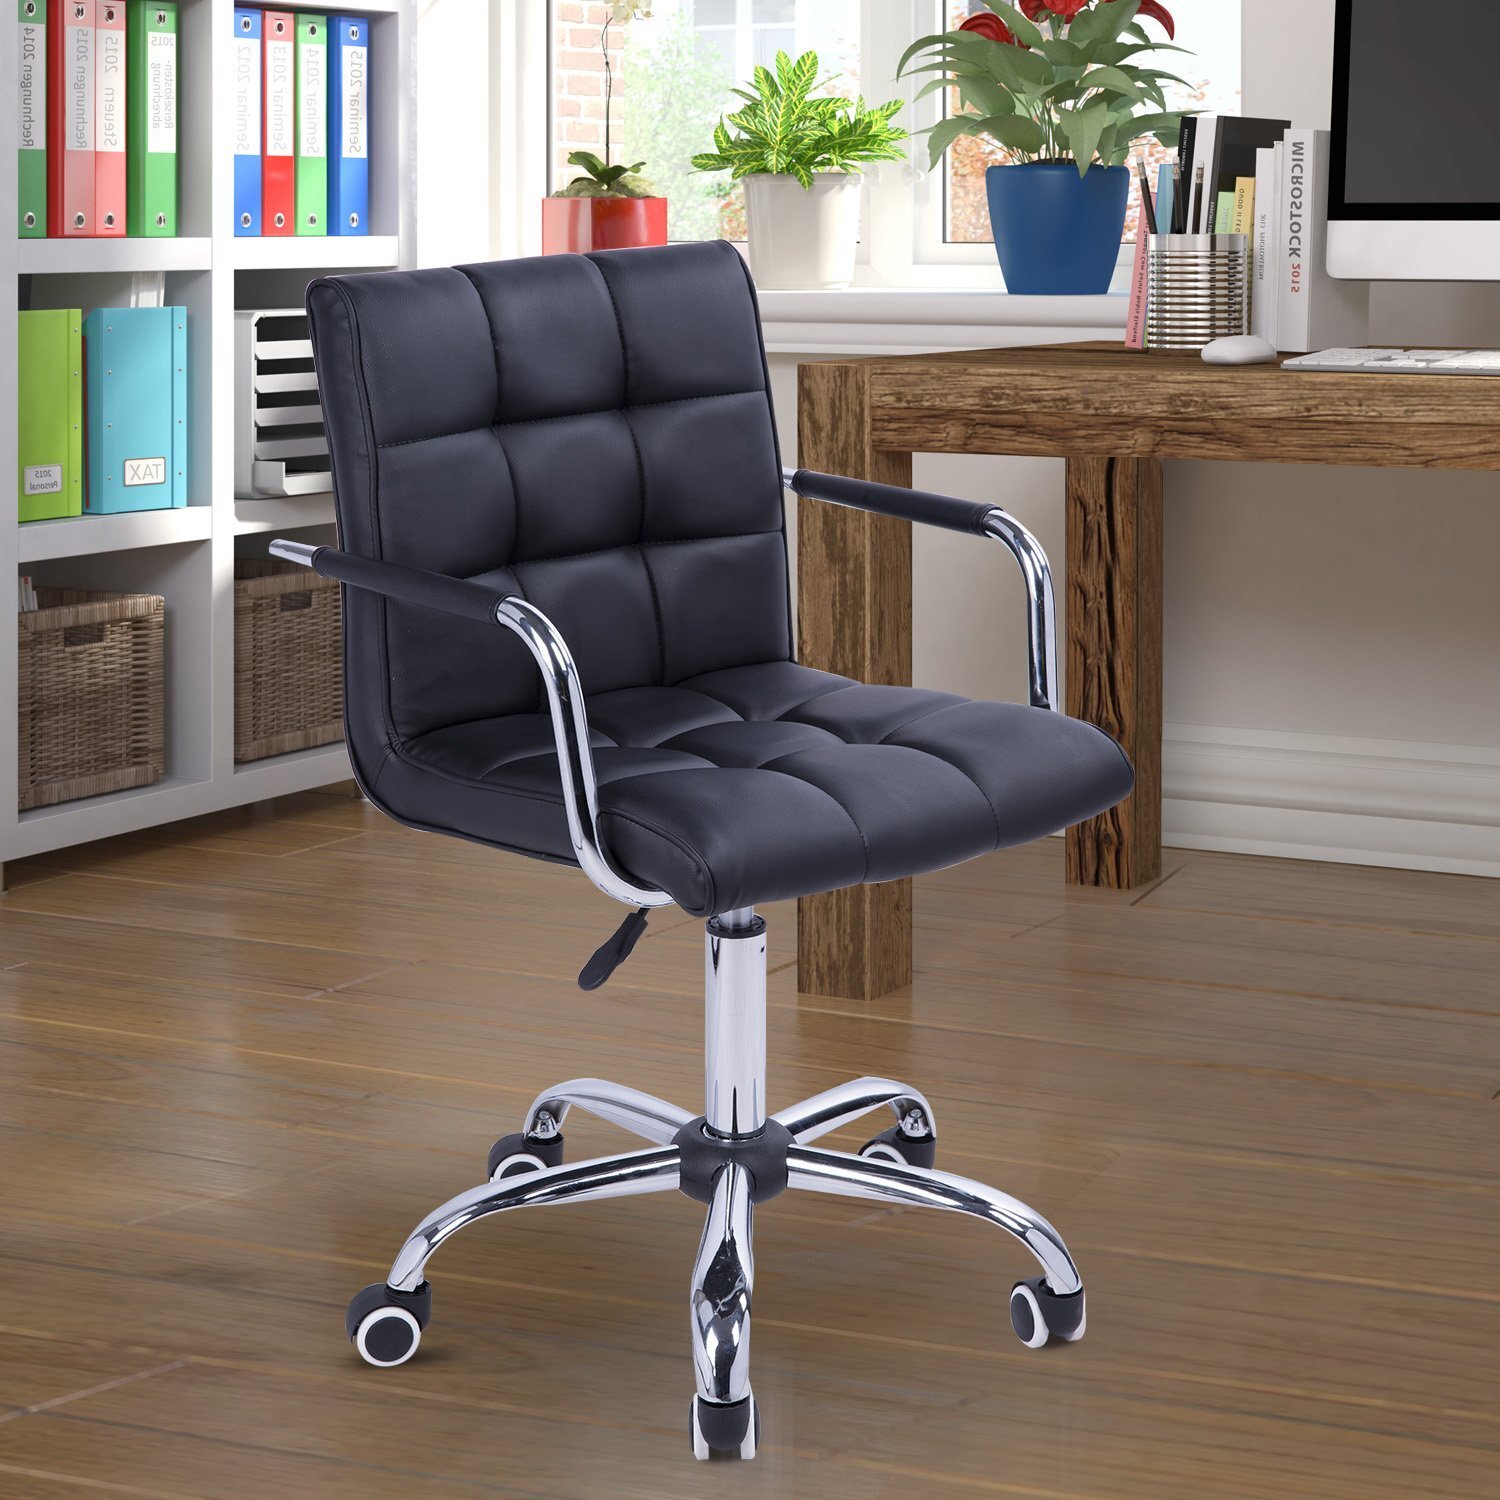 Stylish Faux Leather Computer Office Desk Swivel Chair Wheels Salon Barber Home 